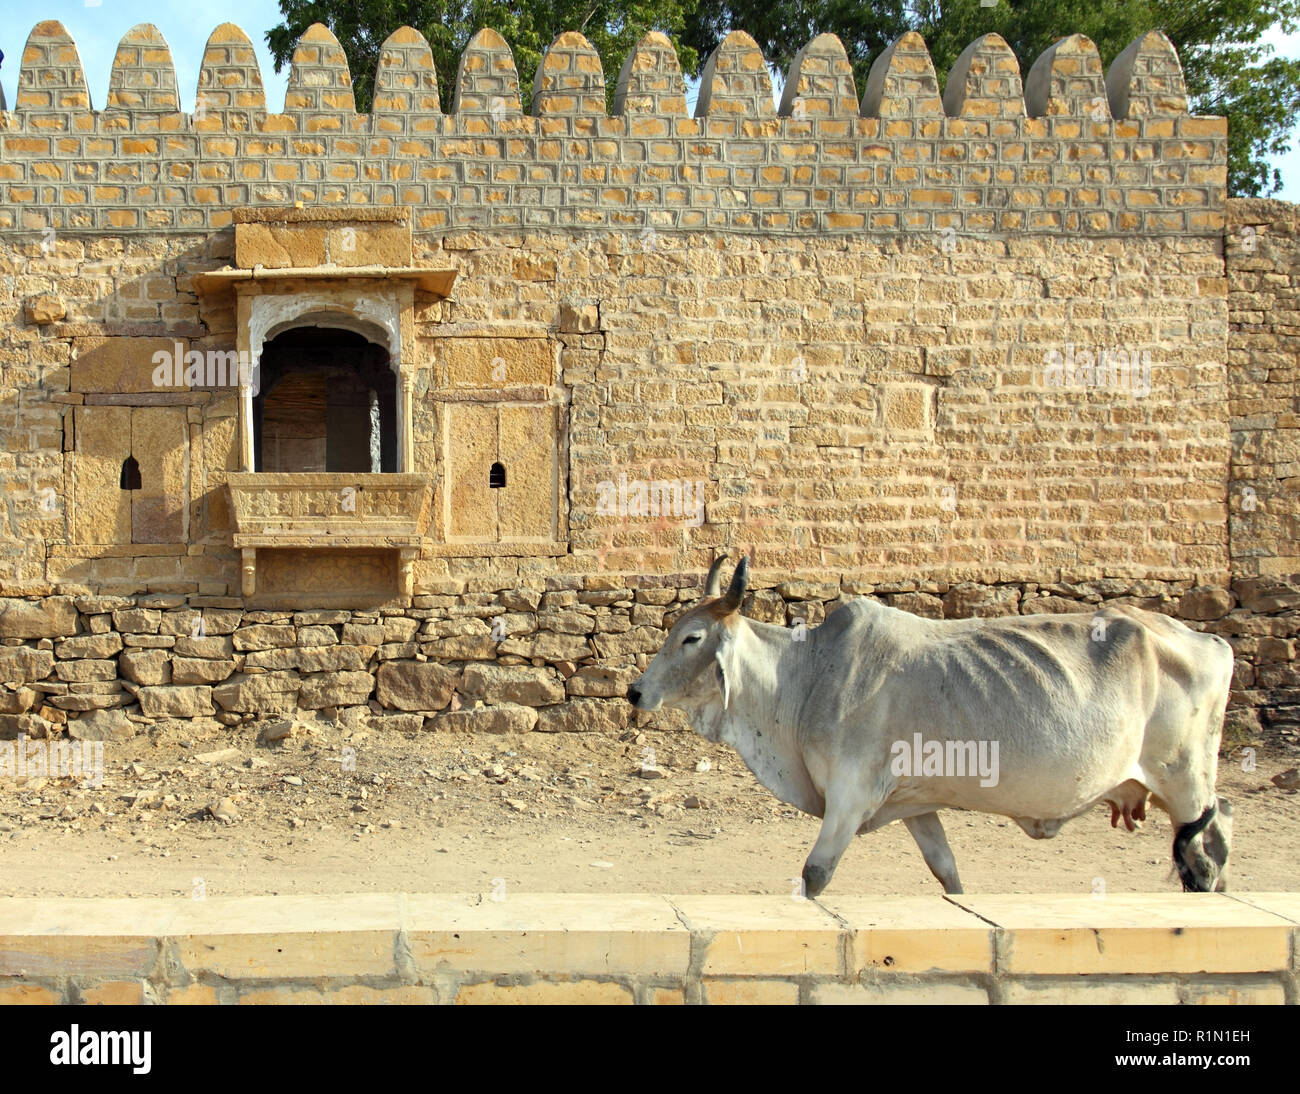 Indian cow on background of ancient building Stock Photo